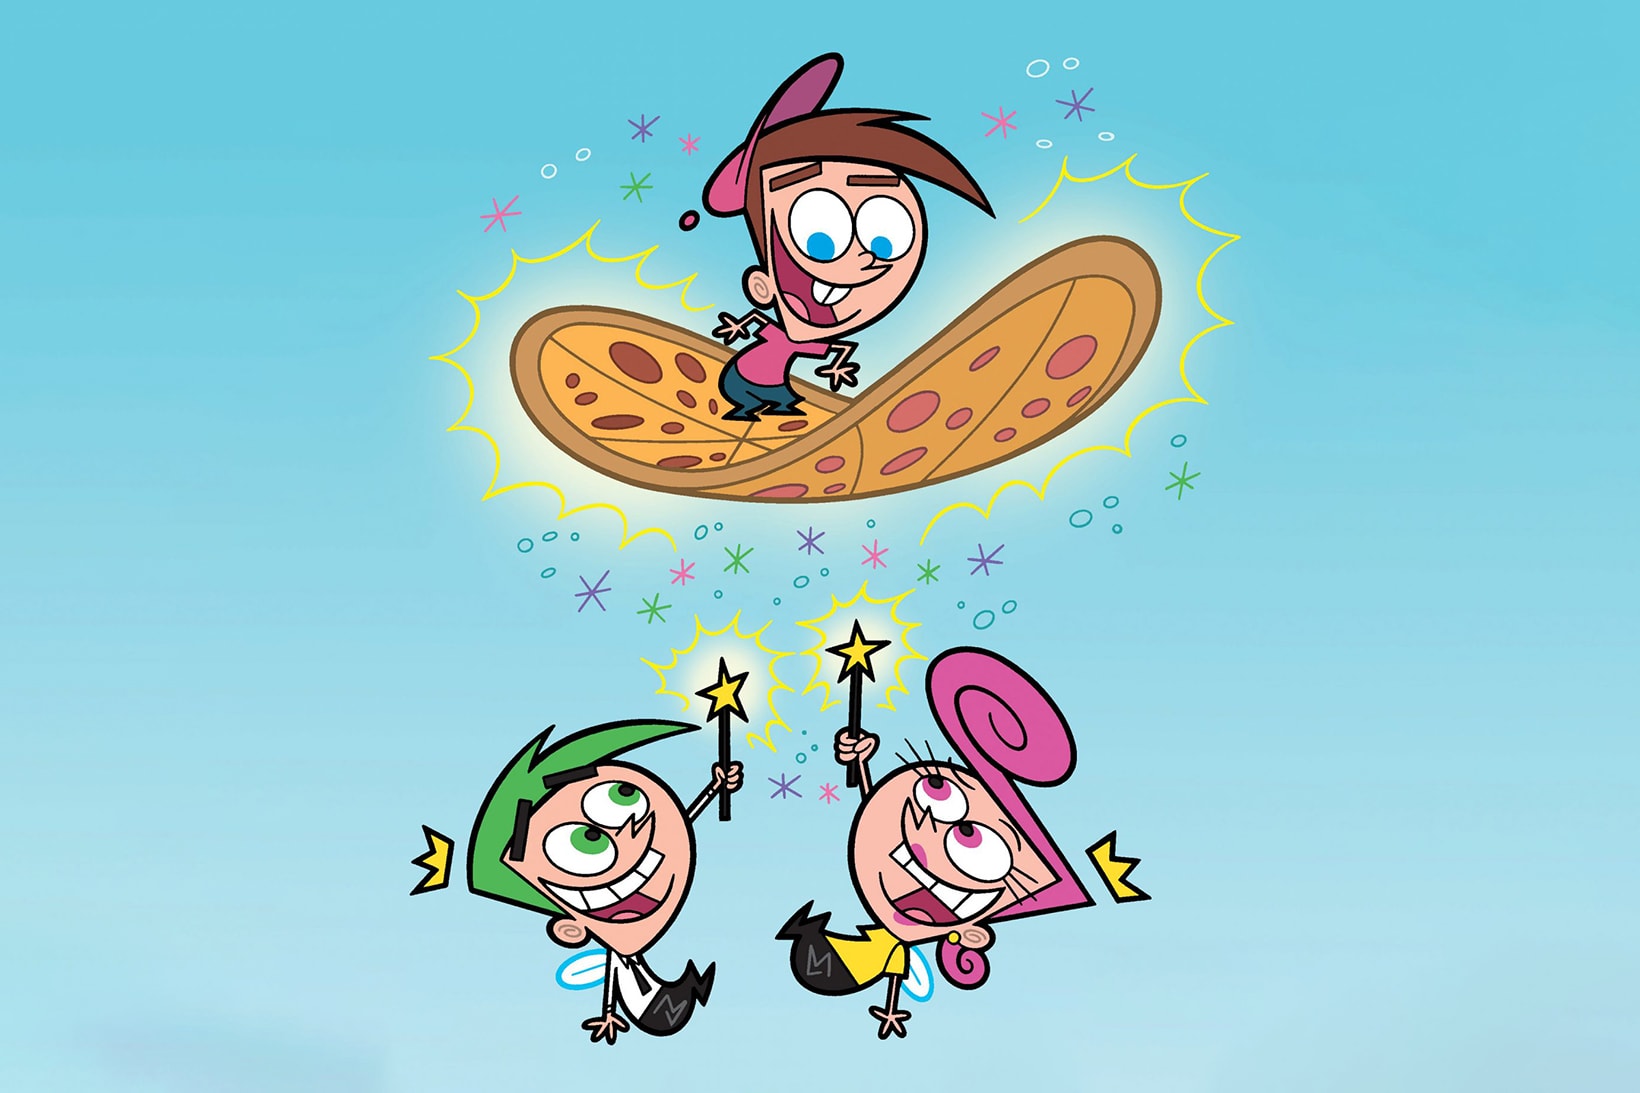 Paramount+ Nickelodeon The Fairly OddParents Live-Action Tv Show Series Cosmo Timmy Turner Wanda